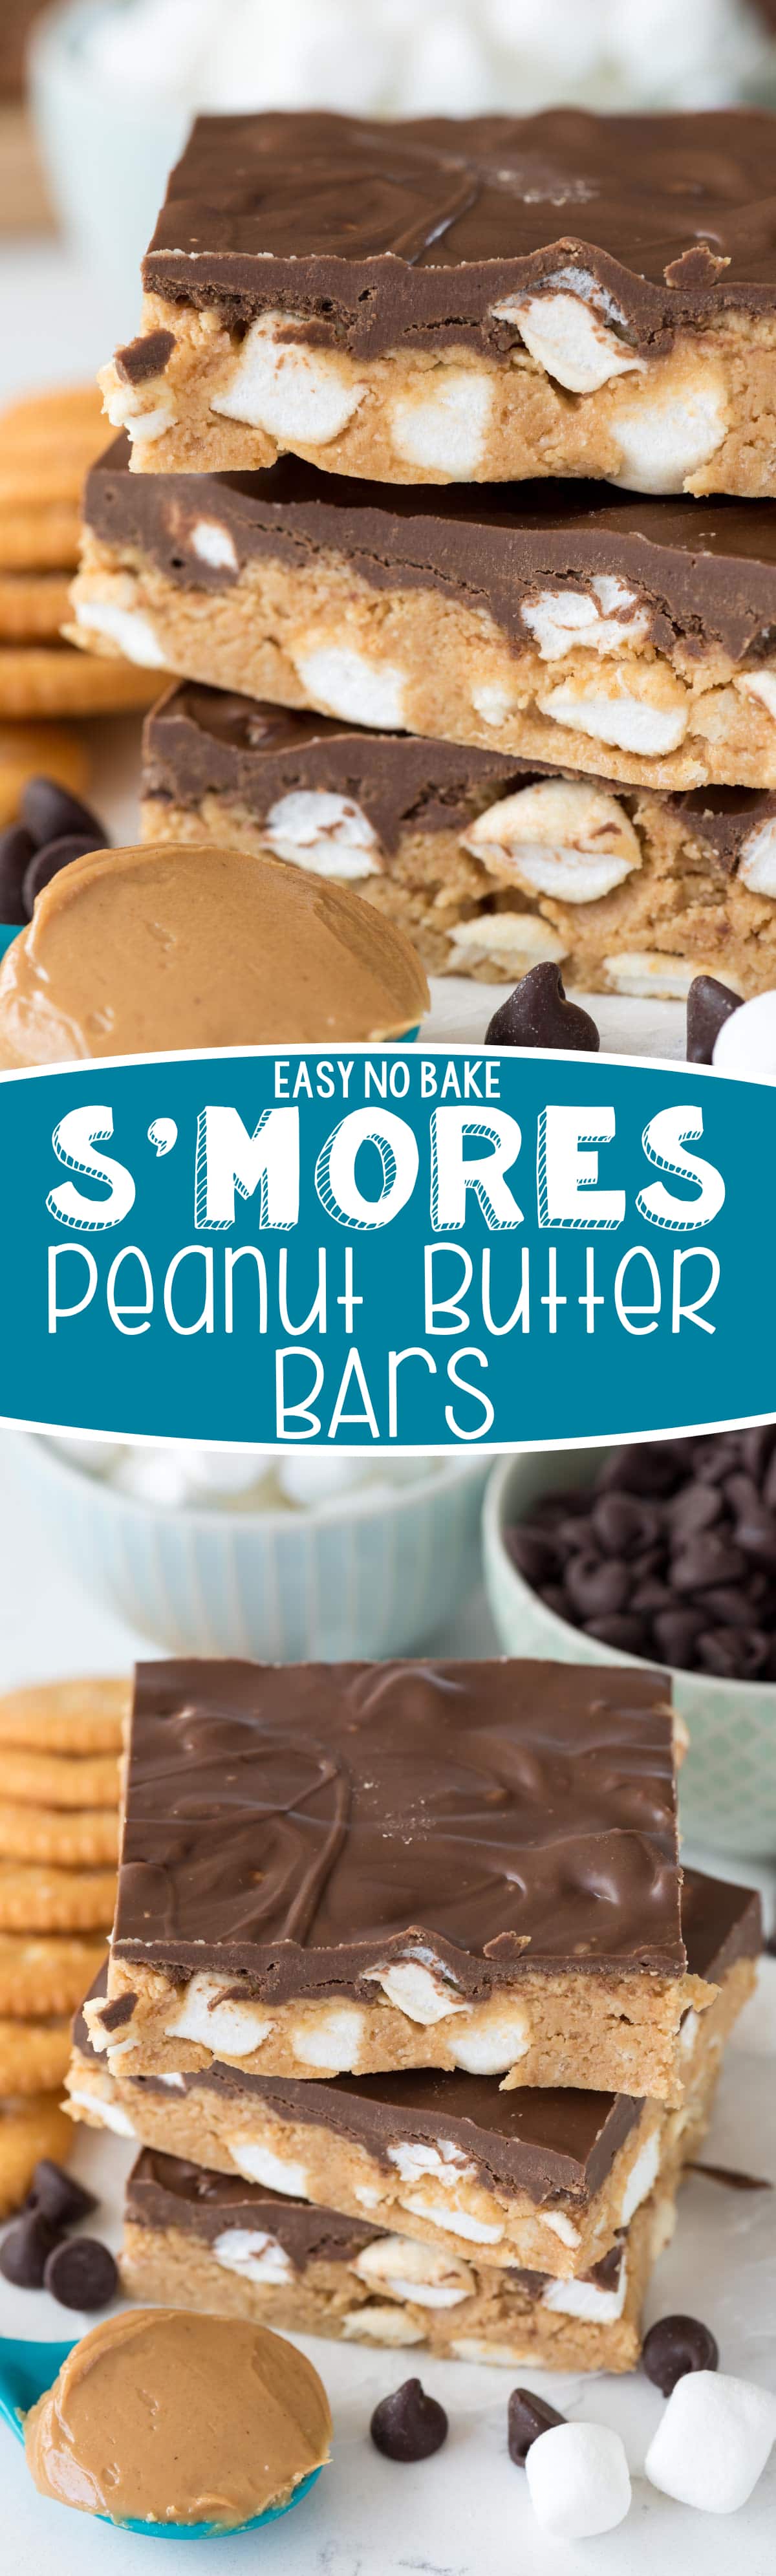 No Bake S'more Peanut Butter Bars - this easy no bake peanut butter bars recipe is filled with marshmallows to make them like s'mores!